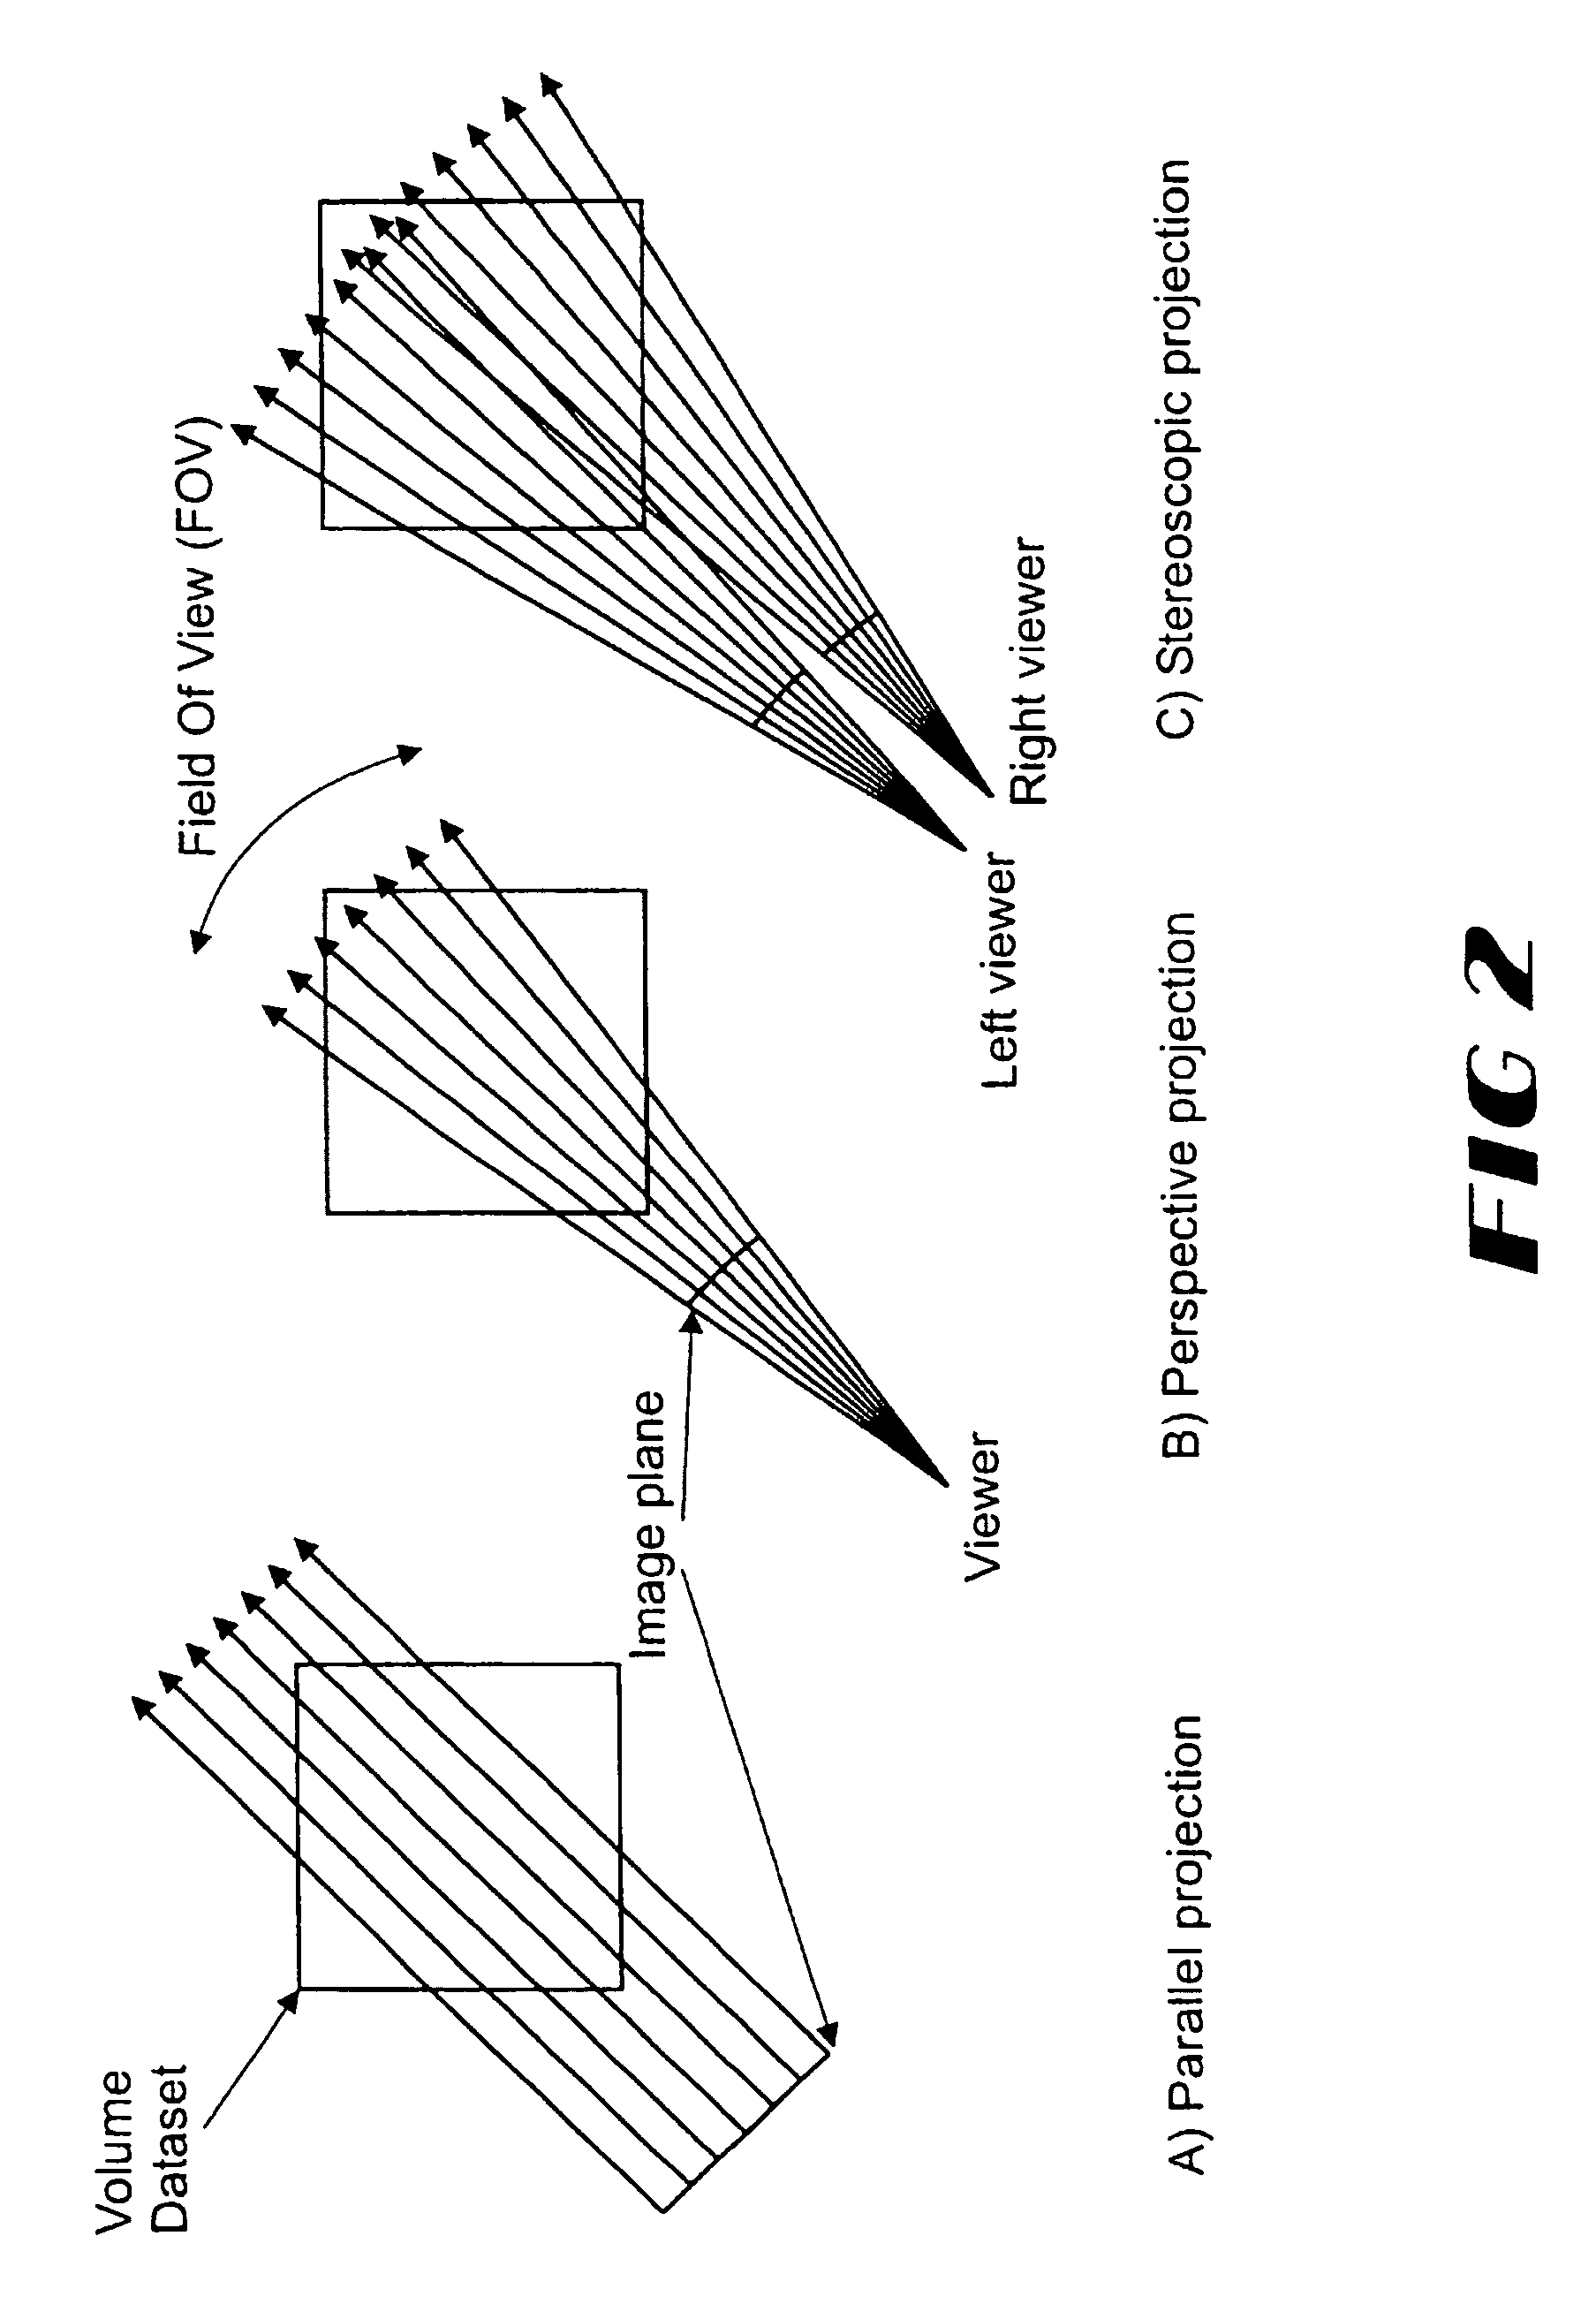 Resample and composite engine for real-time volume rendering